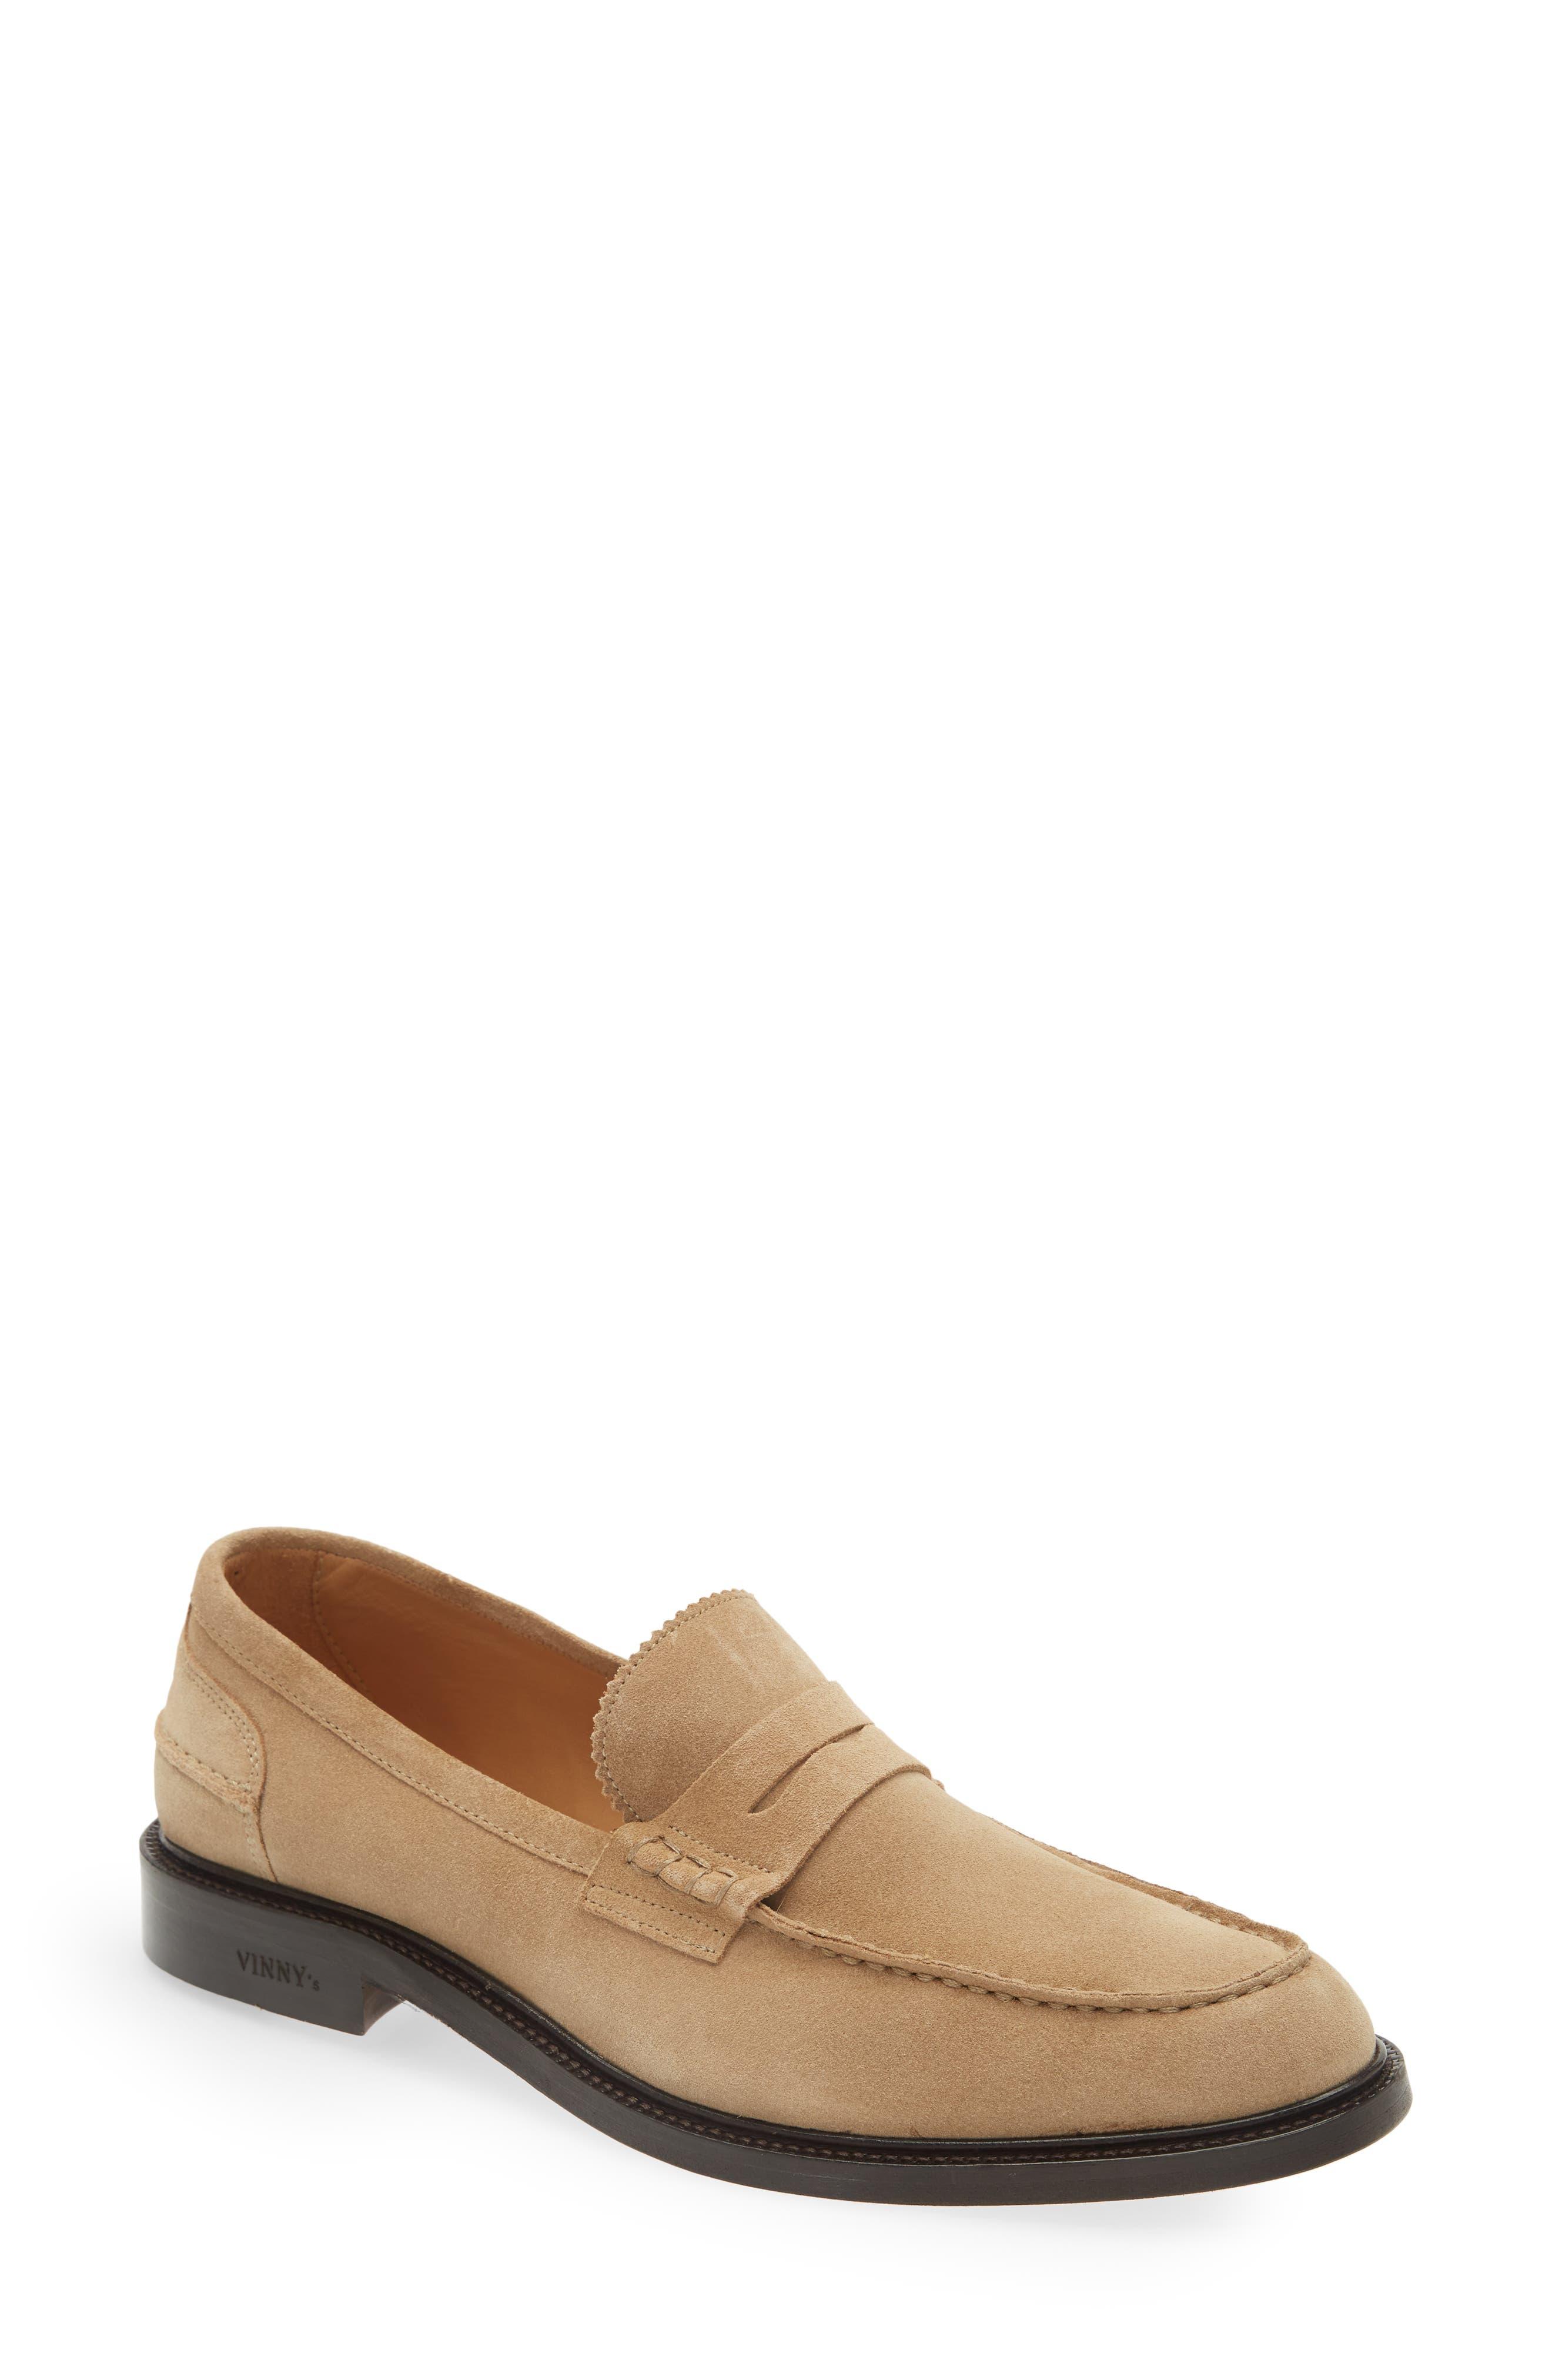 VINNY'S Townee Penny Loafer in Brown for Men | Lyst